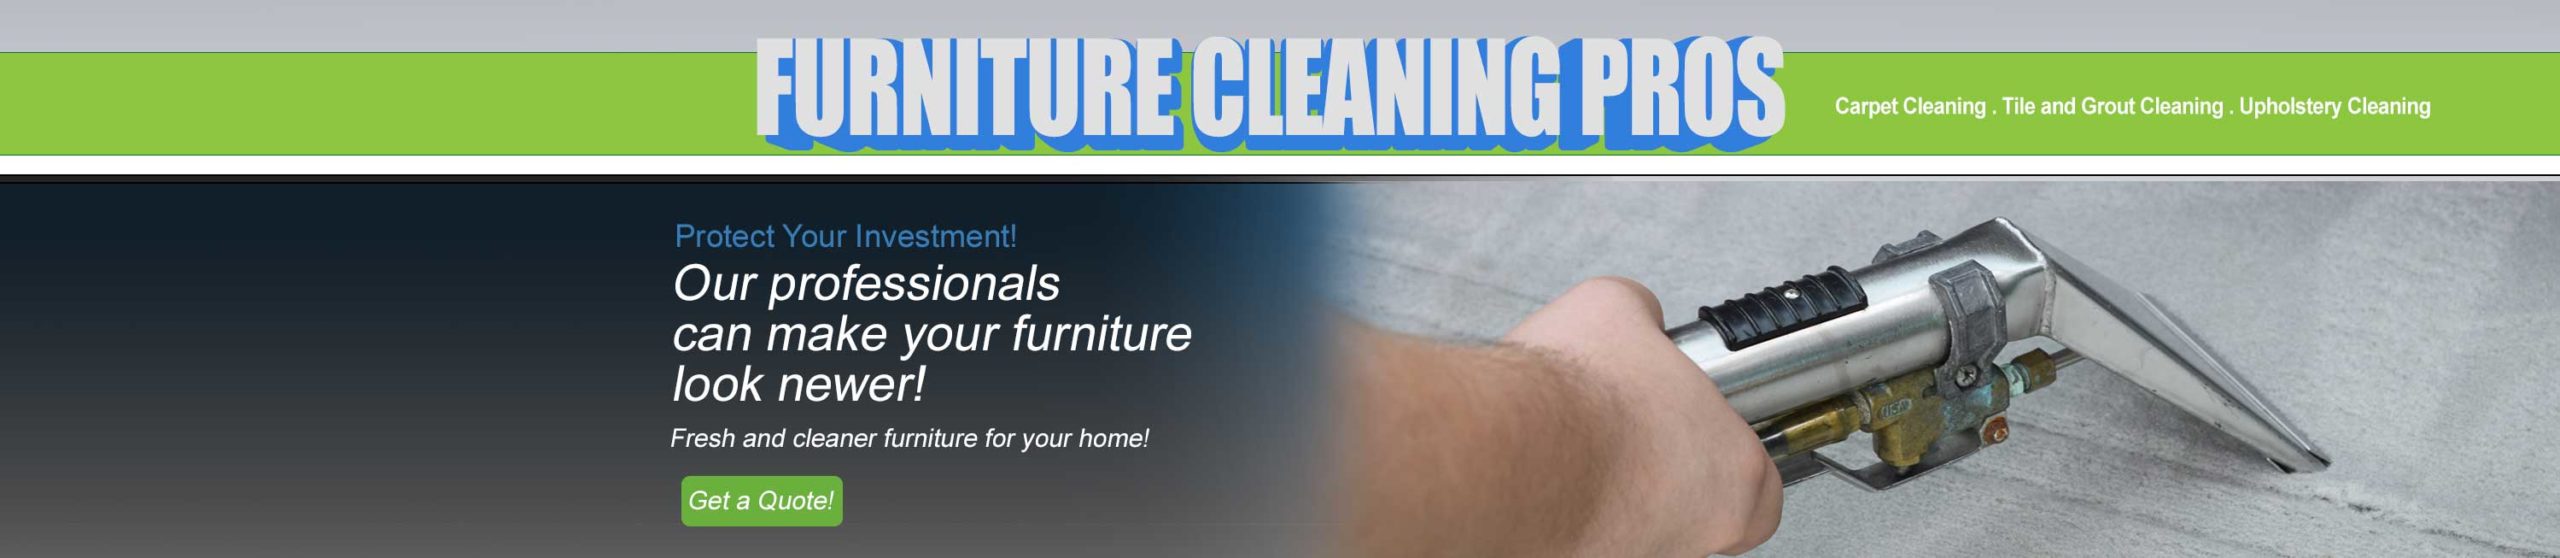 Furniture and upholstery cleaning in Paradise Valley AZ